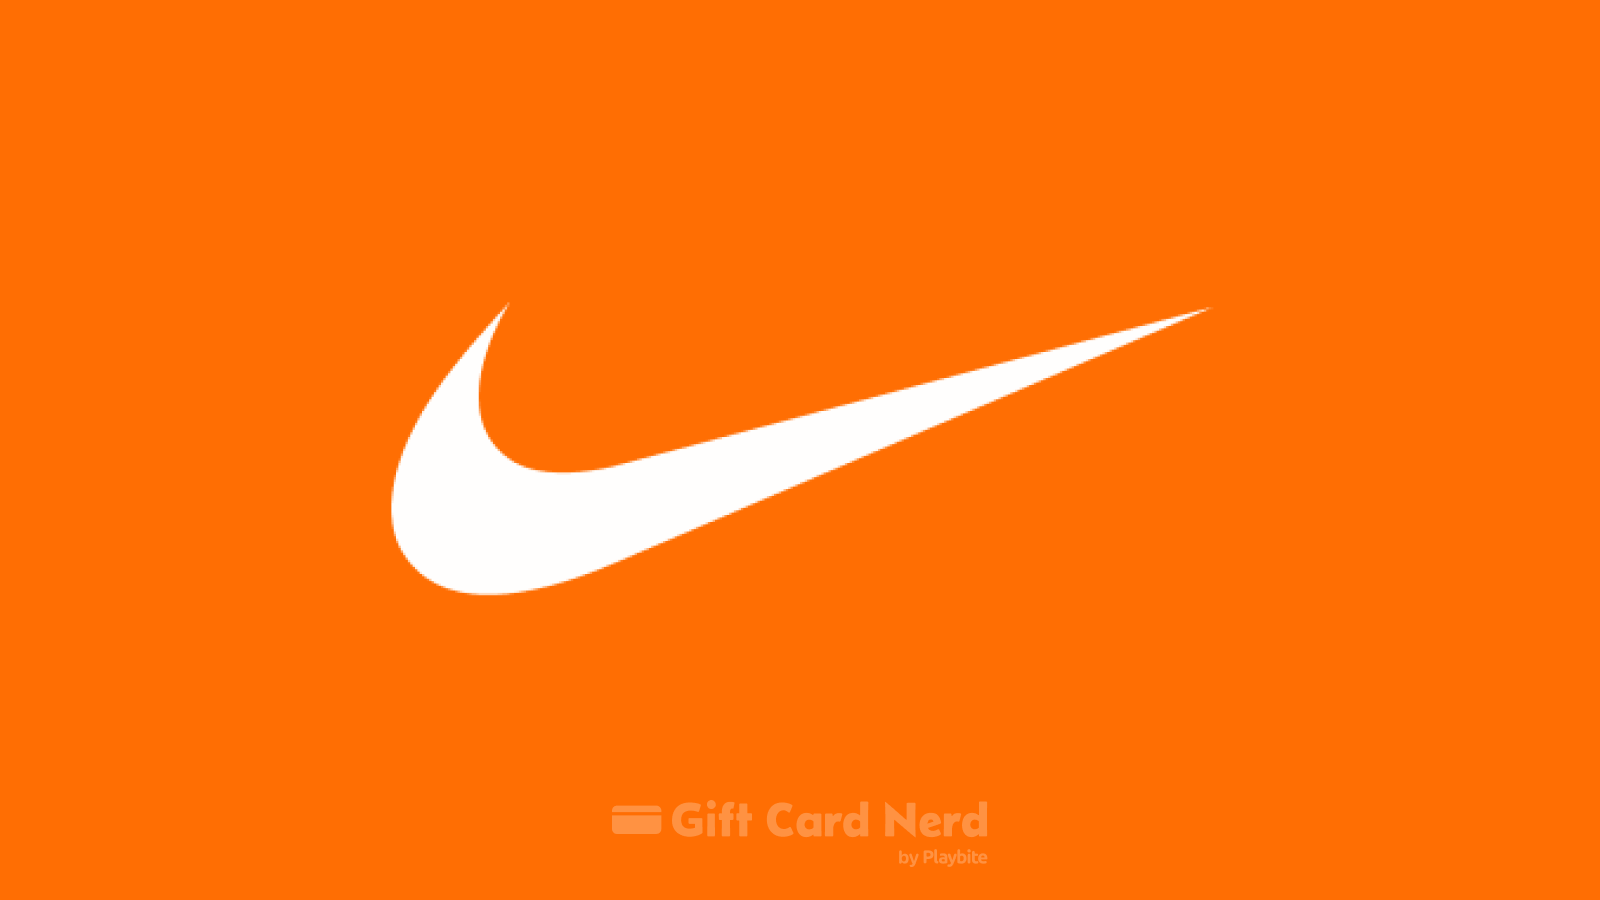 Does Game Stop Sell Nike Gift Cards?